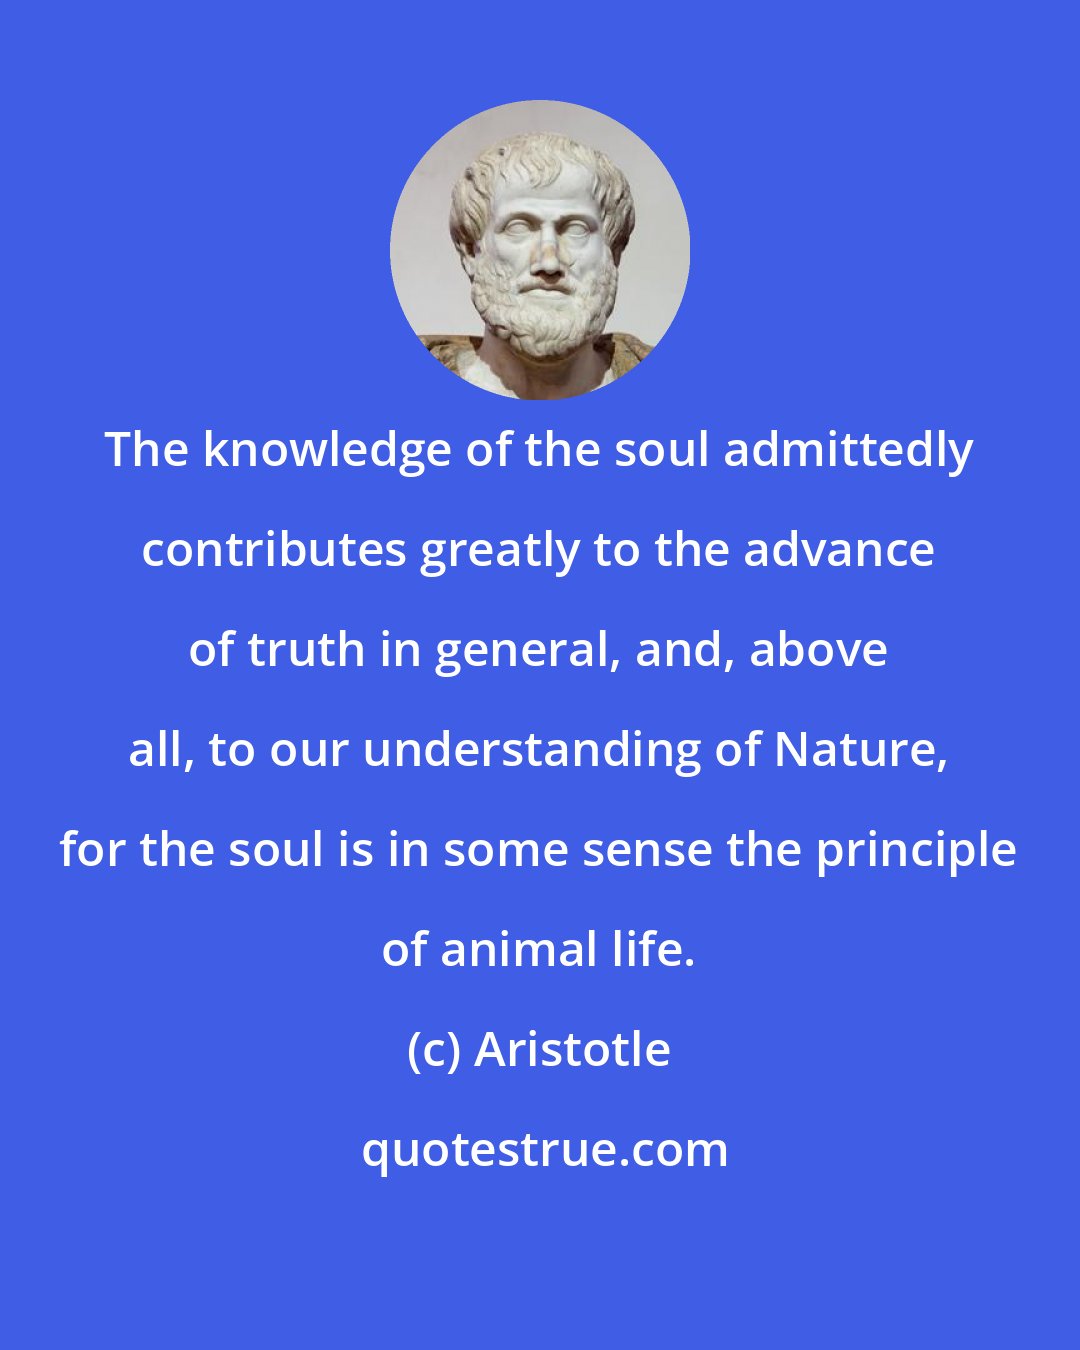 Aristotle: The knowledge of the soul admittedly contributes greatly to the advance of truth in general, and, above all, to our understanding of Nature, for the soul is in some sense the principle of animal life.